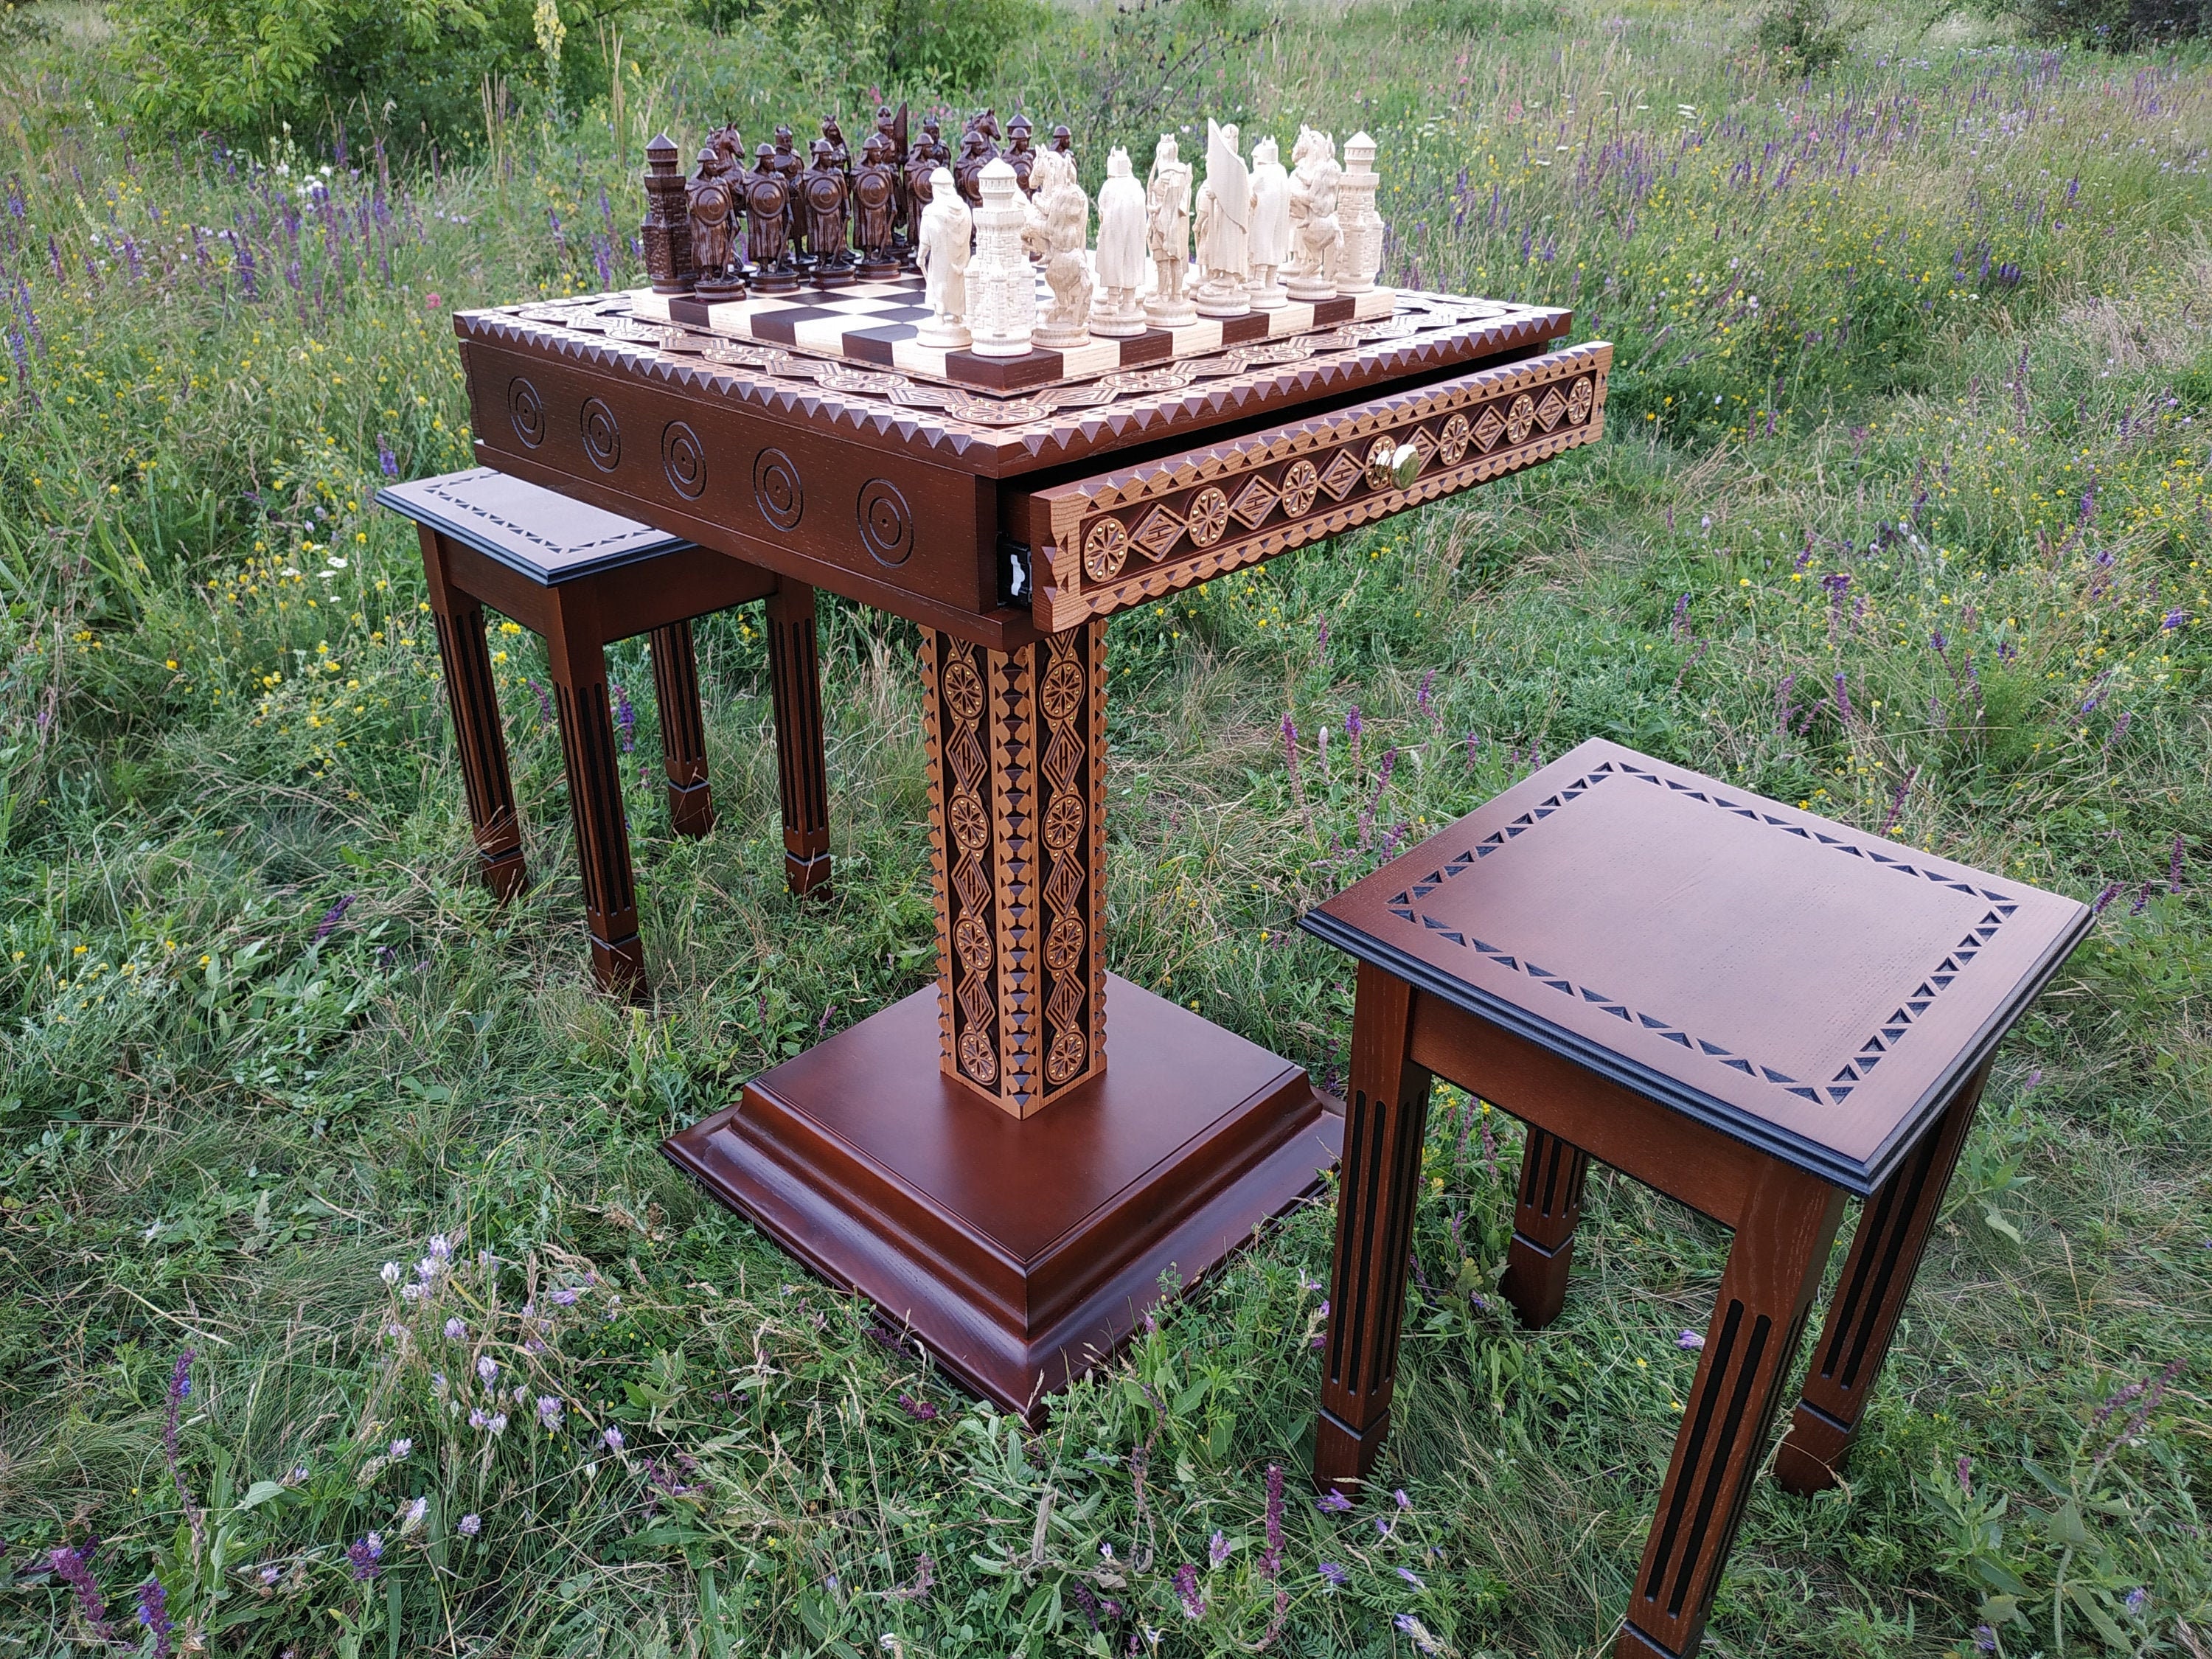 20 Wooden Chess Board Table with Drawers - 24 Height- Golden Rosewoo